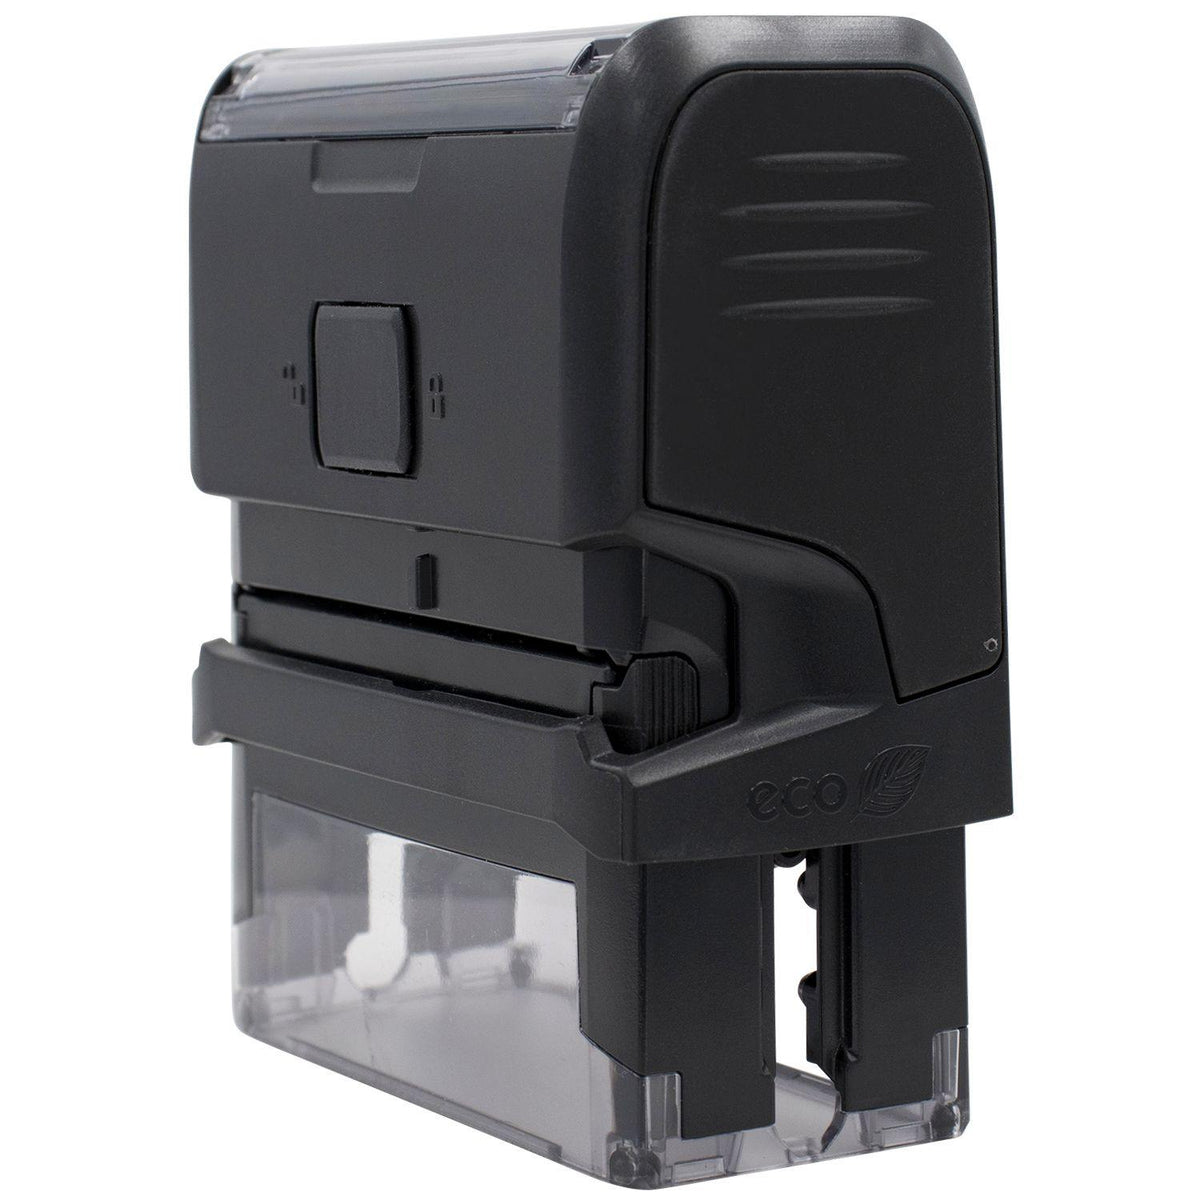 Self Inking Final Notice Stamp - Engineer Seal Stamps - Brand_Trodat, Impression Size_Small, Stamp Type_Self-Inking Stamp, Type of Use_Business